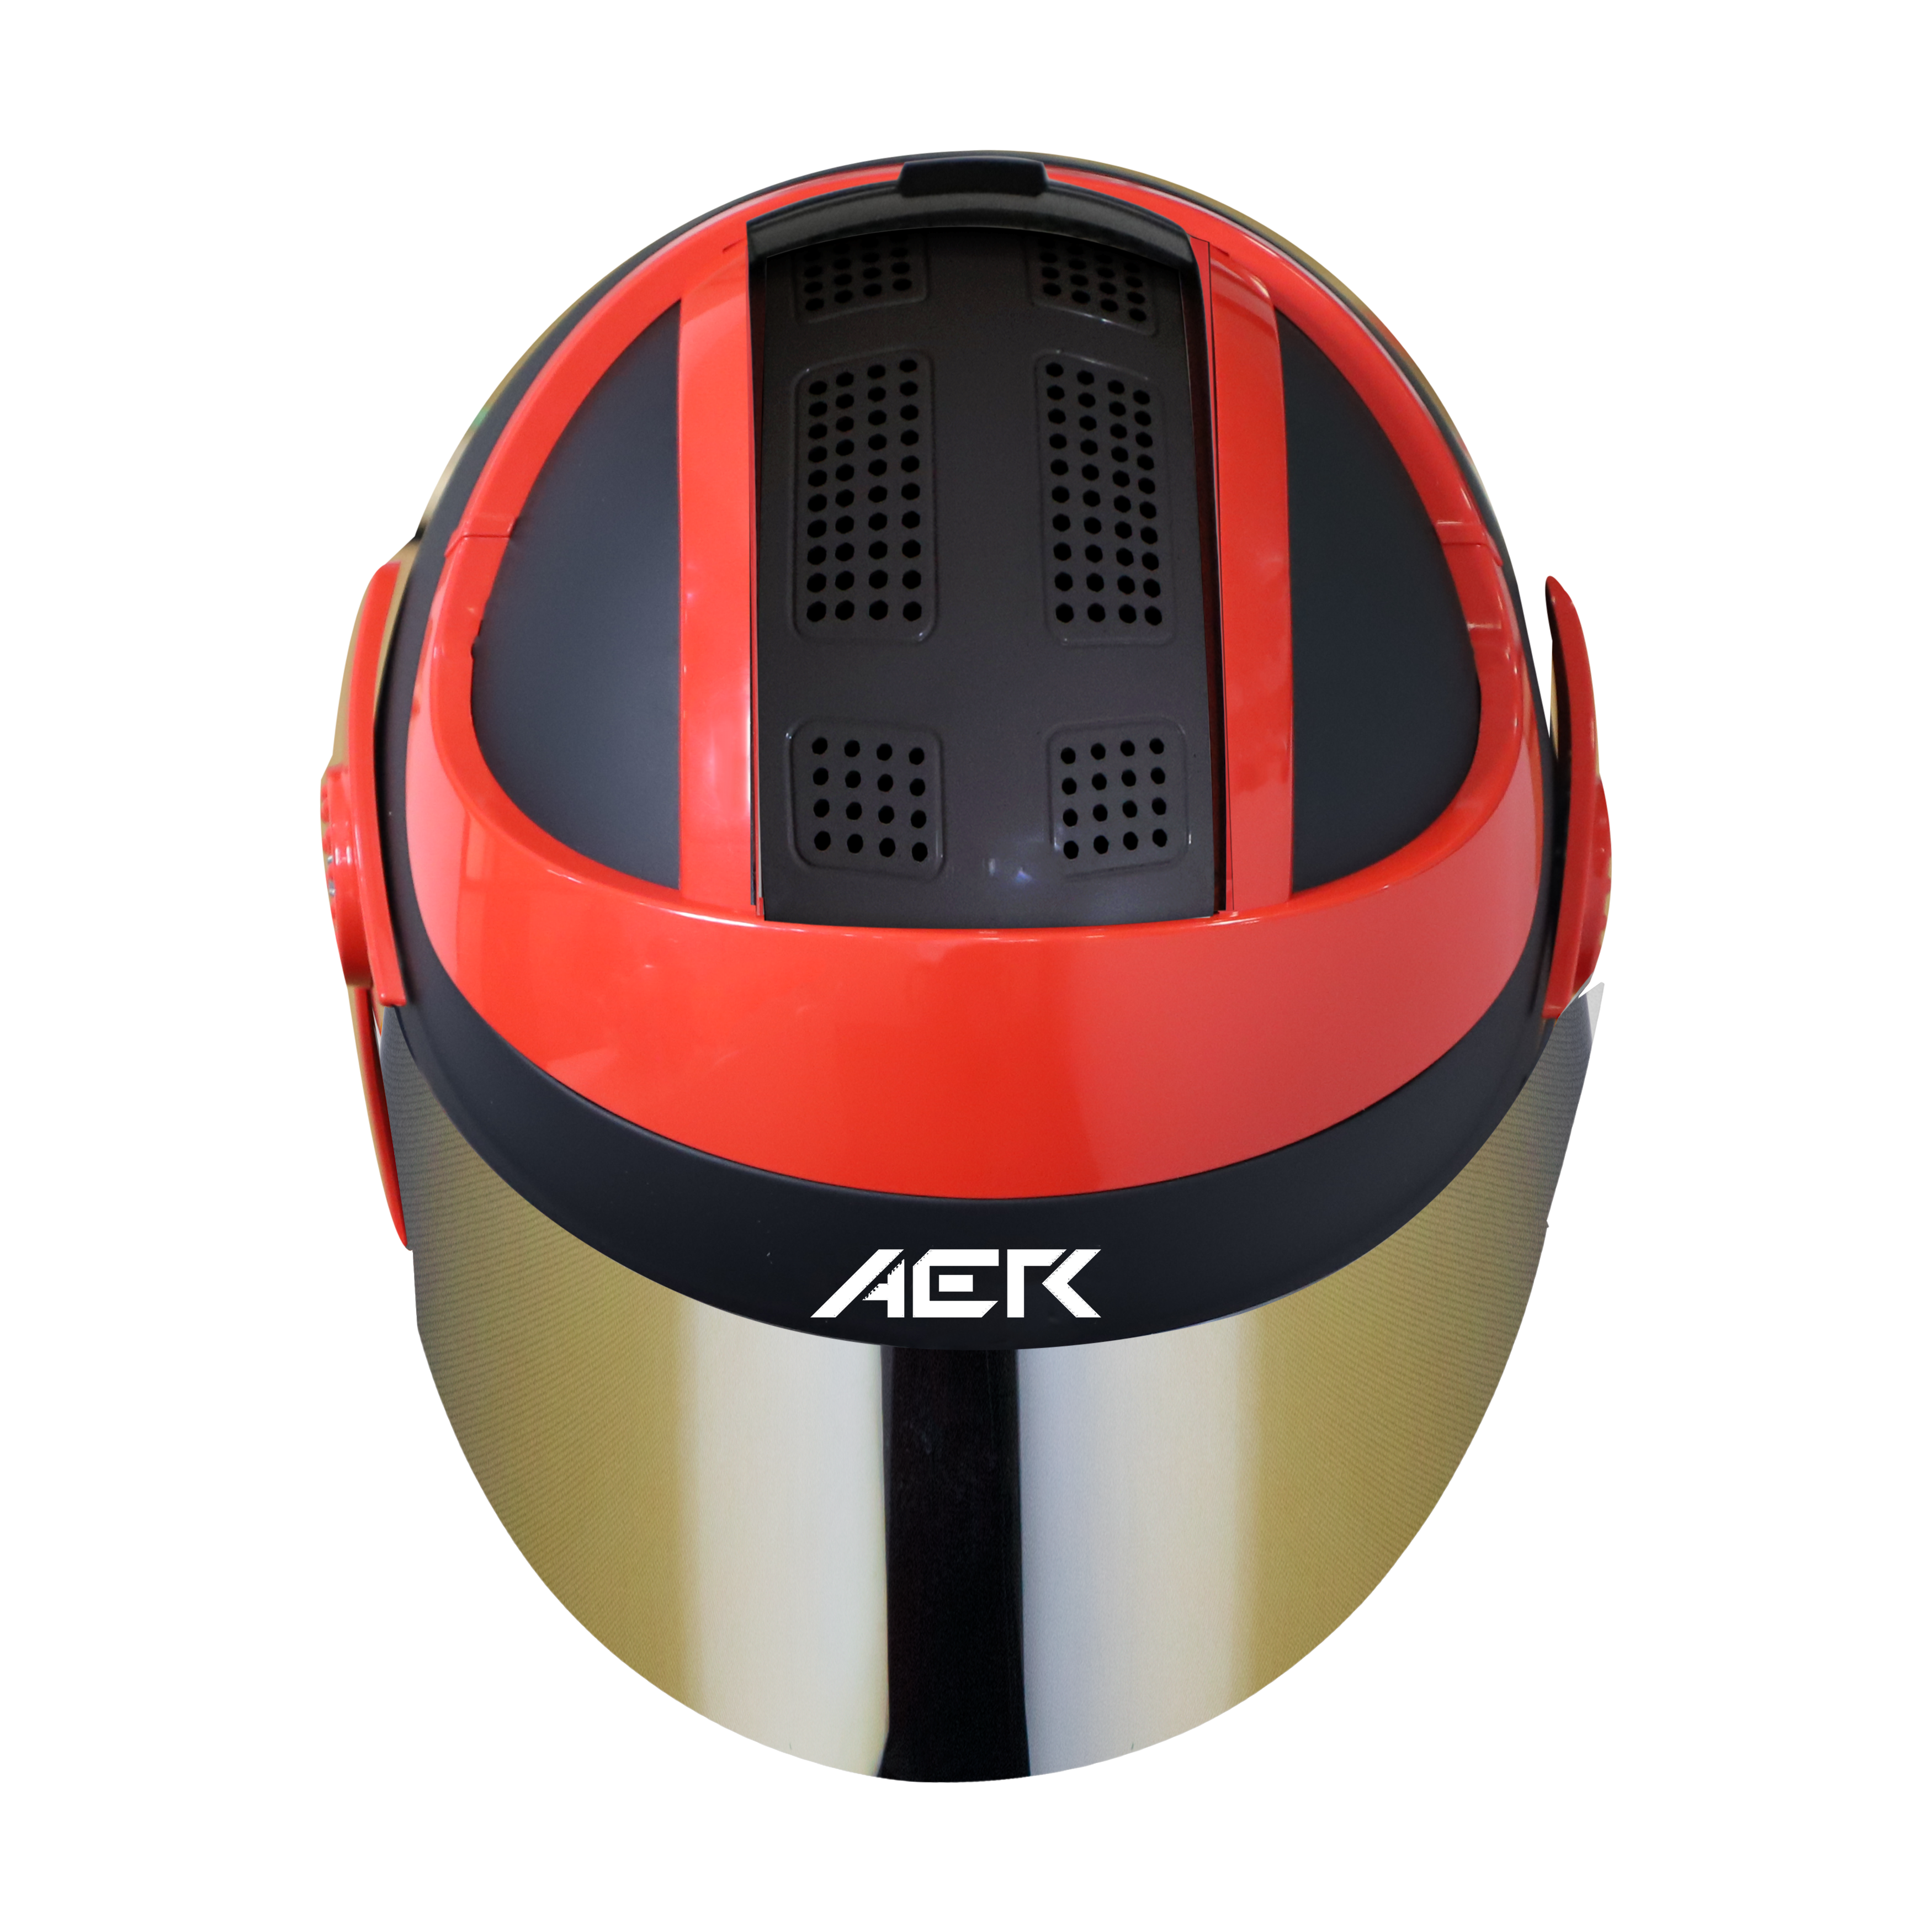 SB-29 AER MAT BLACK WITH RED (FITTED WITH CLEAR VISOR WITH EXTRA CHROME GOLD VISOR FREE) 